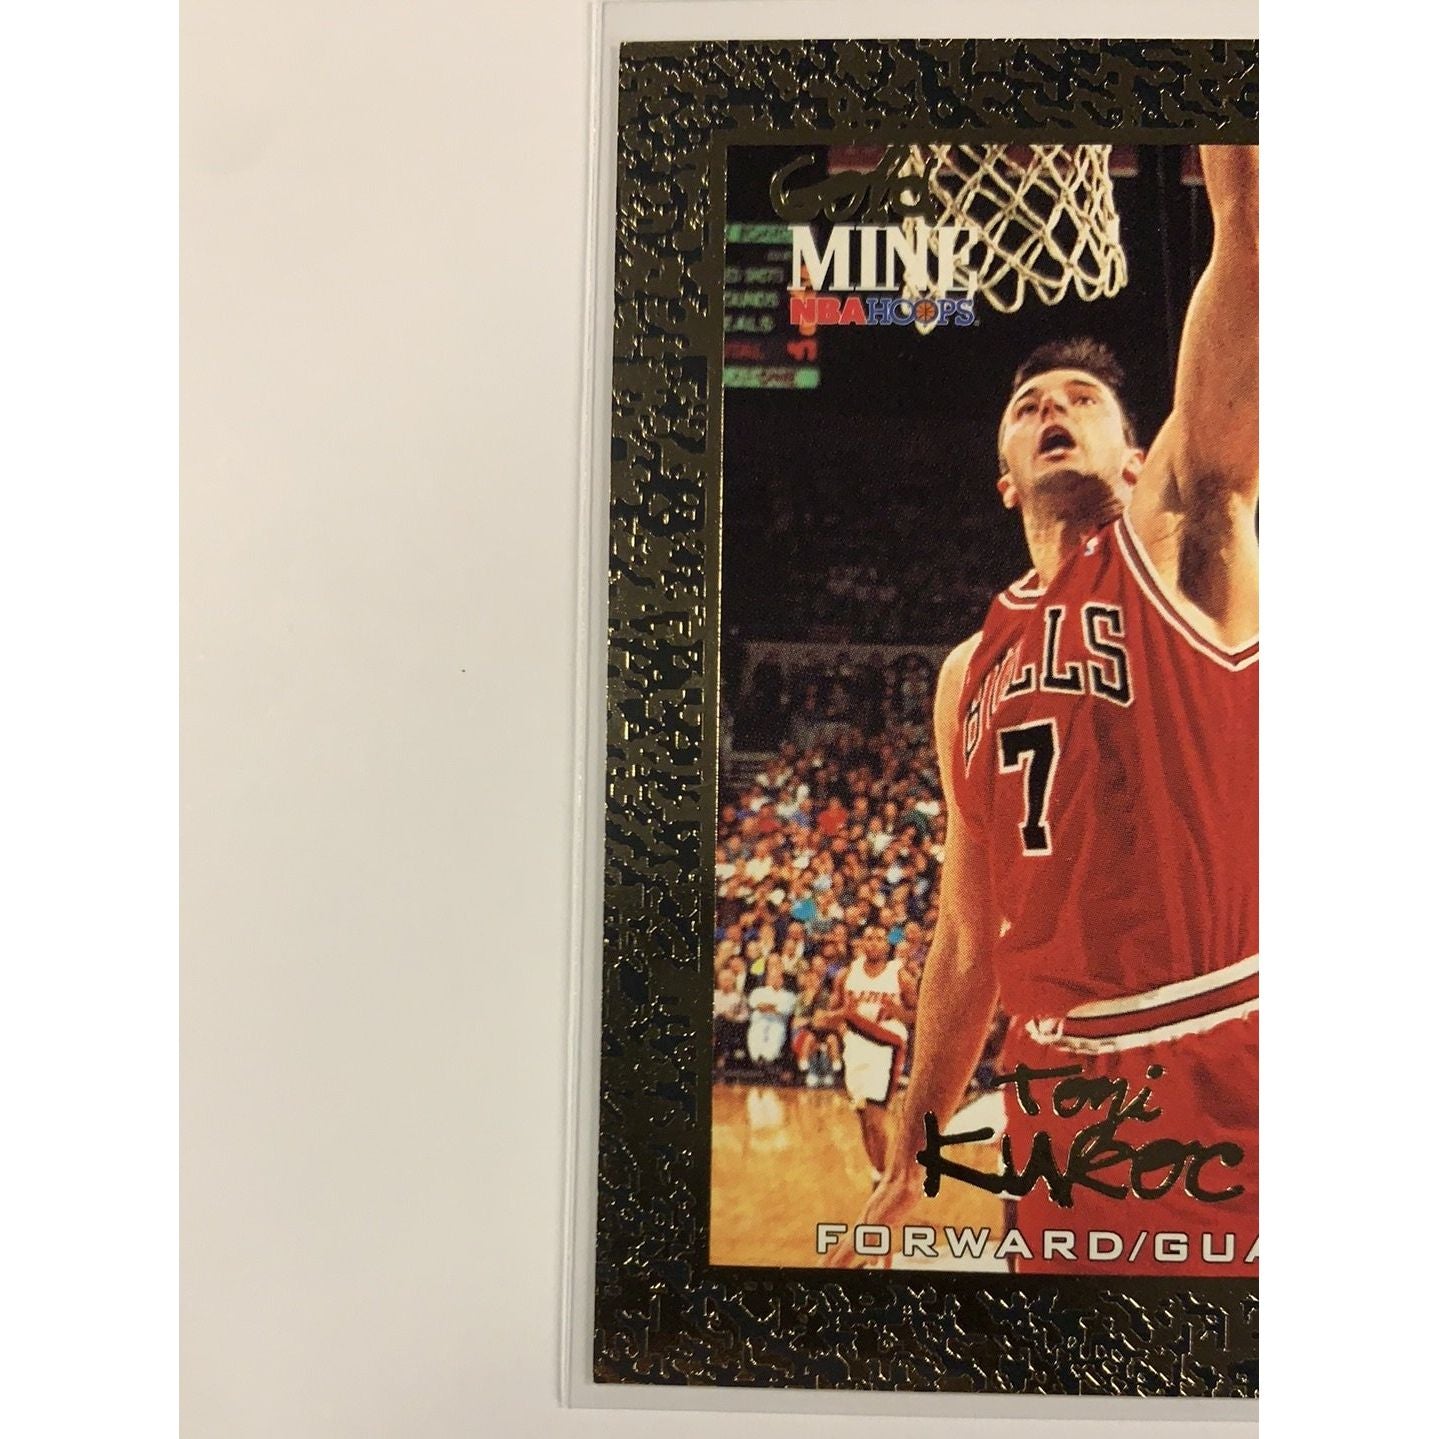  1995 NBA Hoops Gold Mine Toni Kukoc  Local Legends Cards & Collectibles